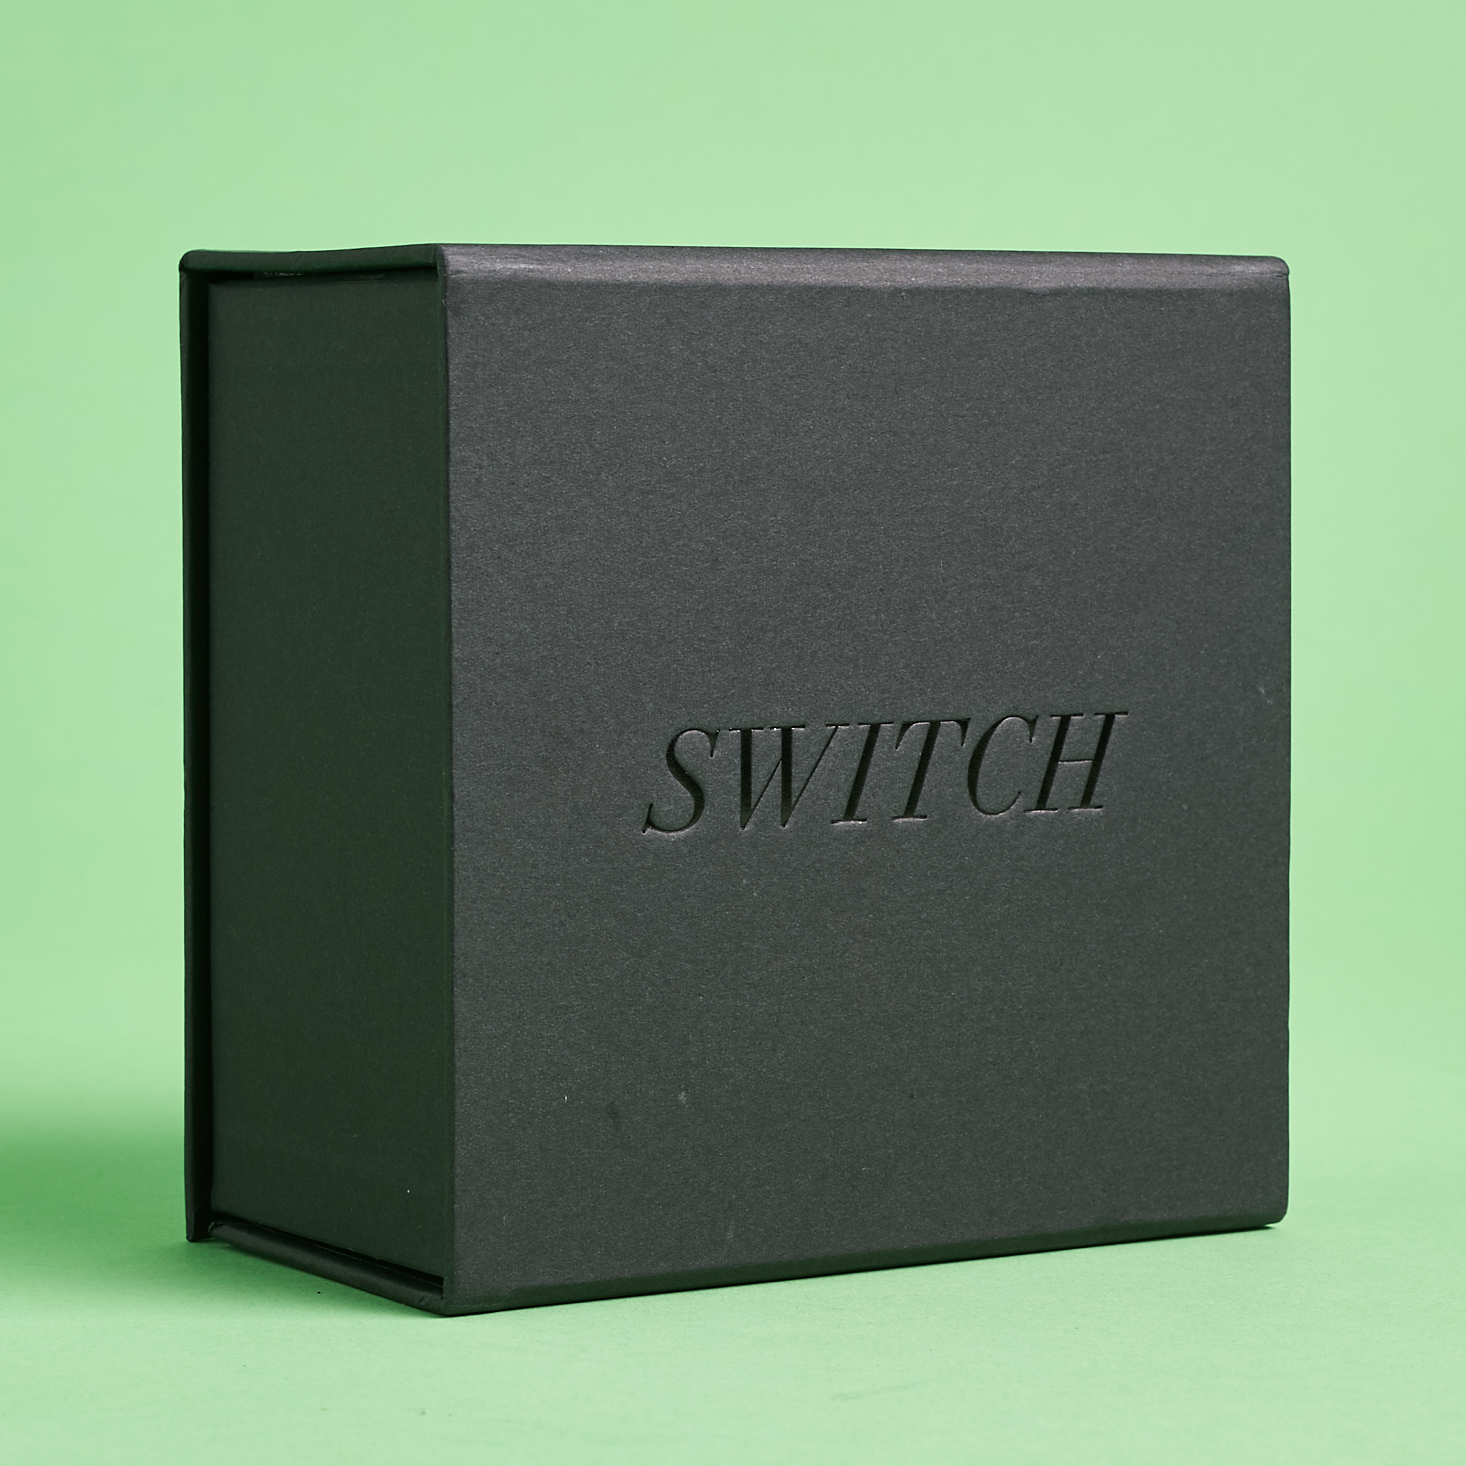 Switch Designer Jewelry Rental Review + 50% Off Coupon – April 2020